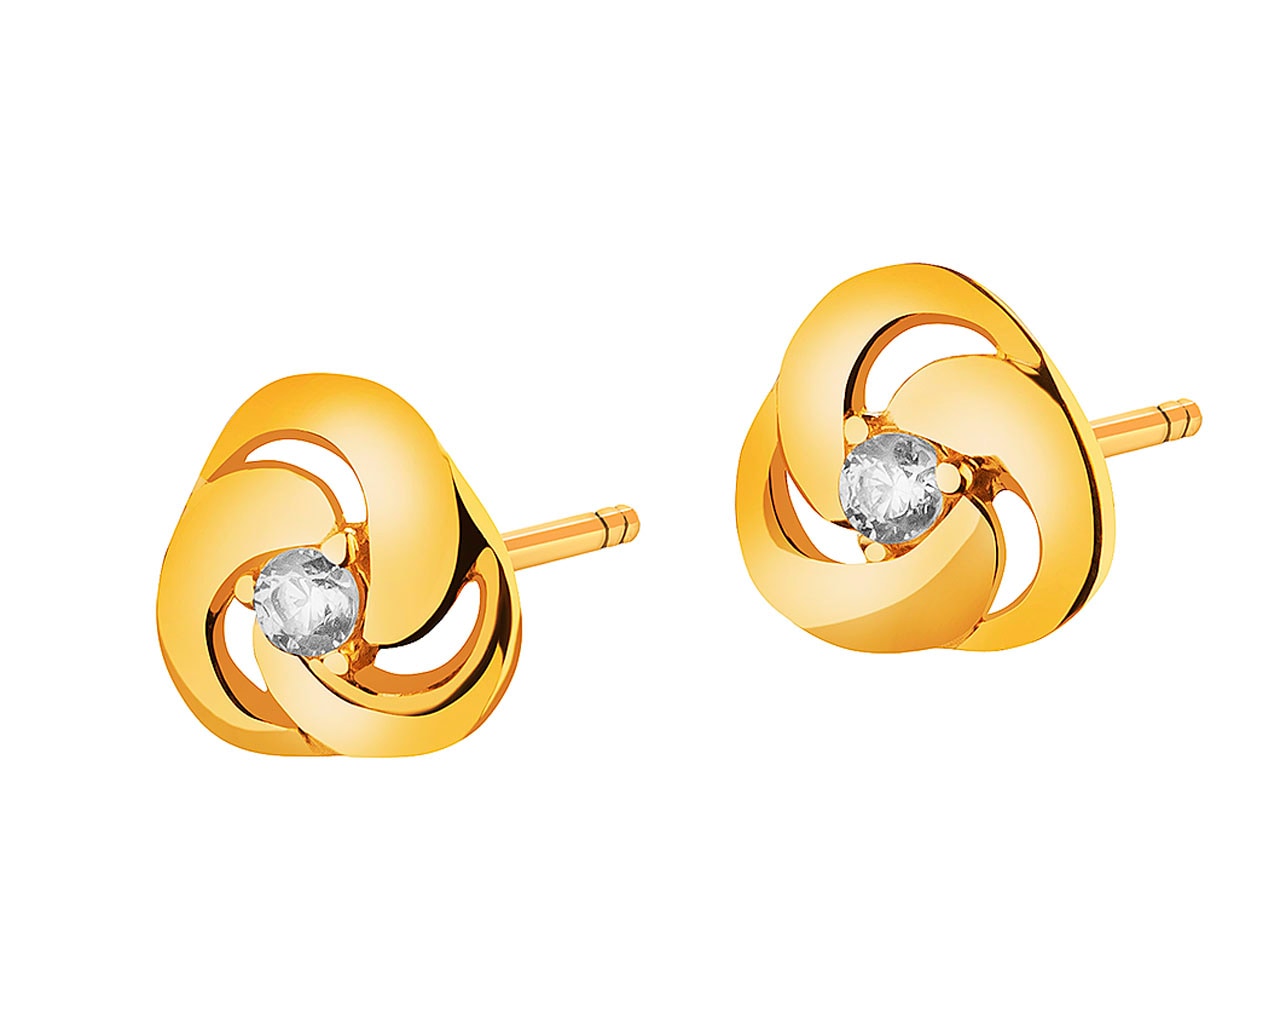 Sepreters. | Gold earrings designs, Gold jewelry sets, Gold jewelry fashion